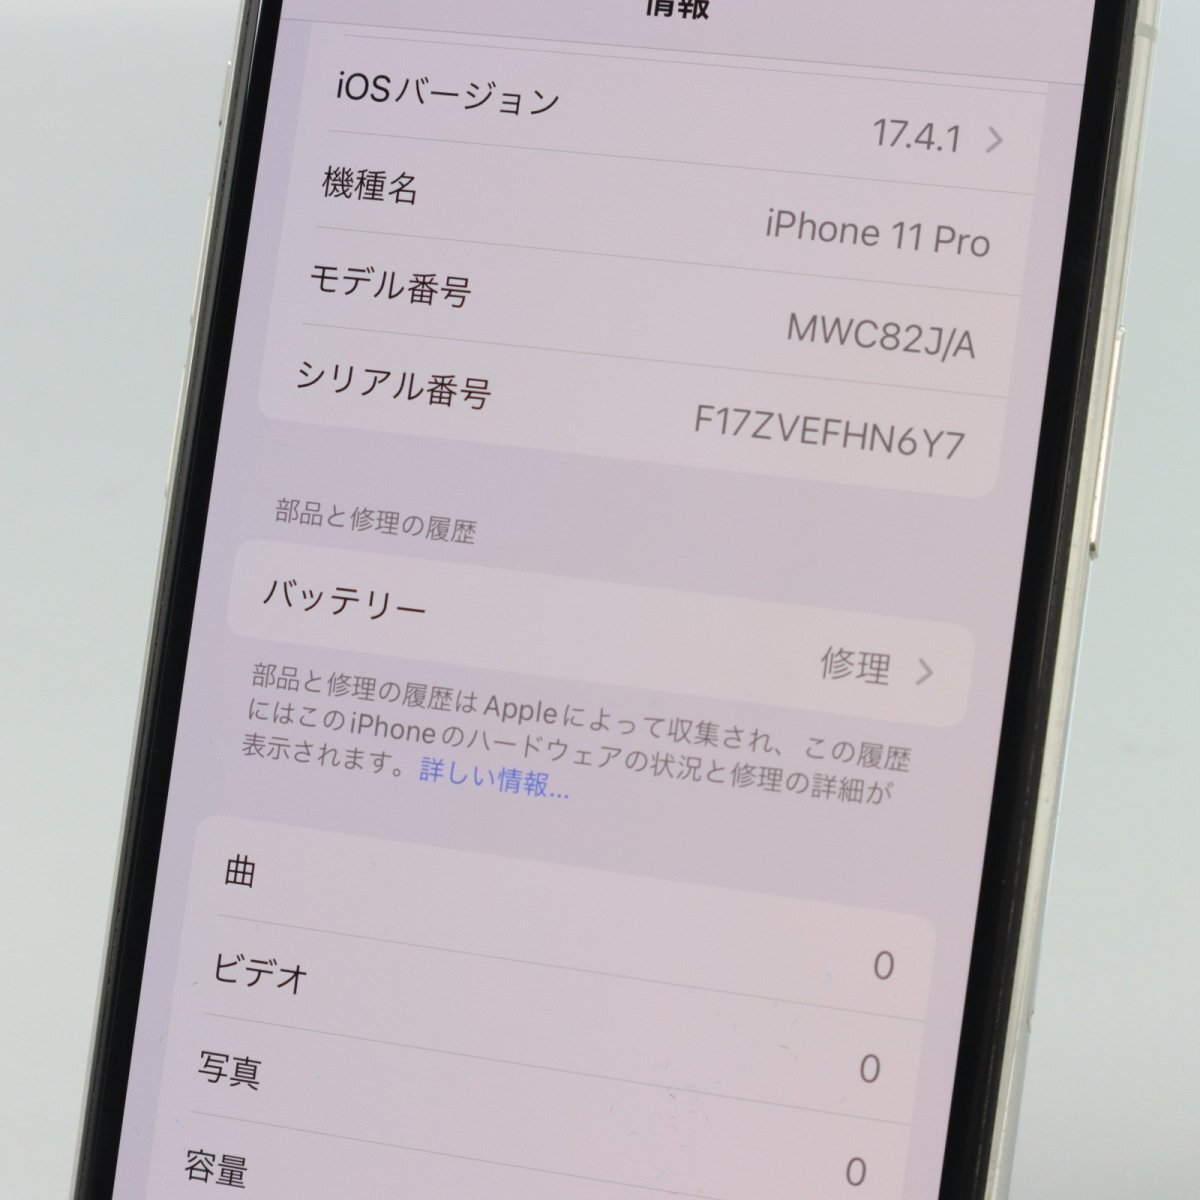 Apple iPhone11 Pro 256GB Silver A2215 MWC82J/A バッテリ68% ■ソフトバンク★Joshin2644【1円開始・送料無料】の画像3